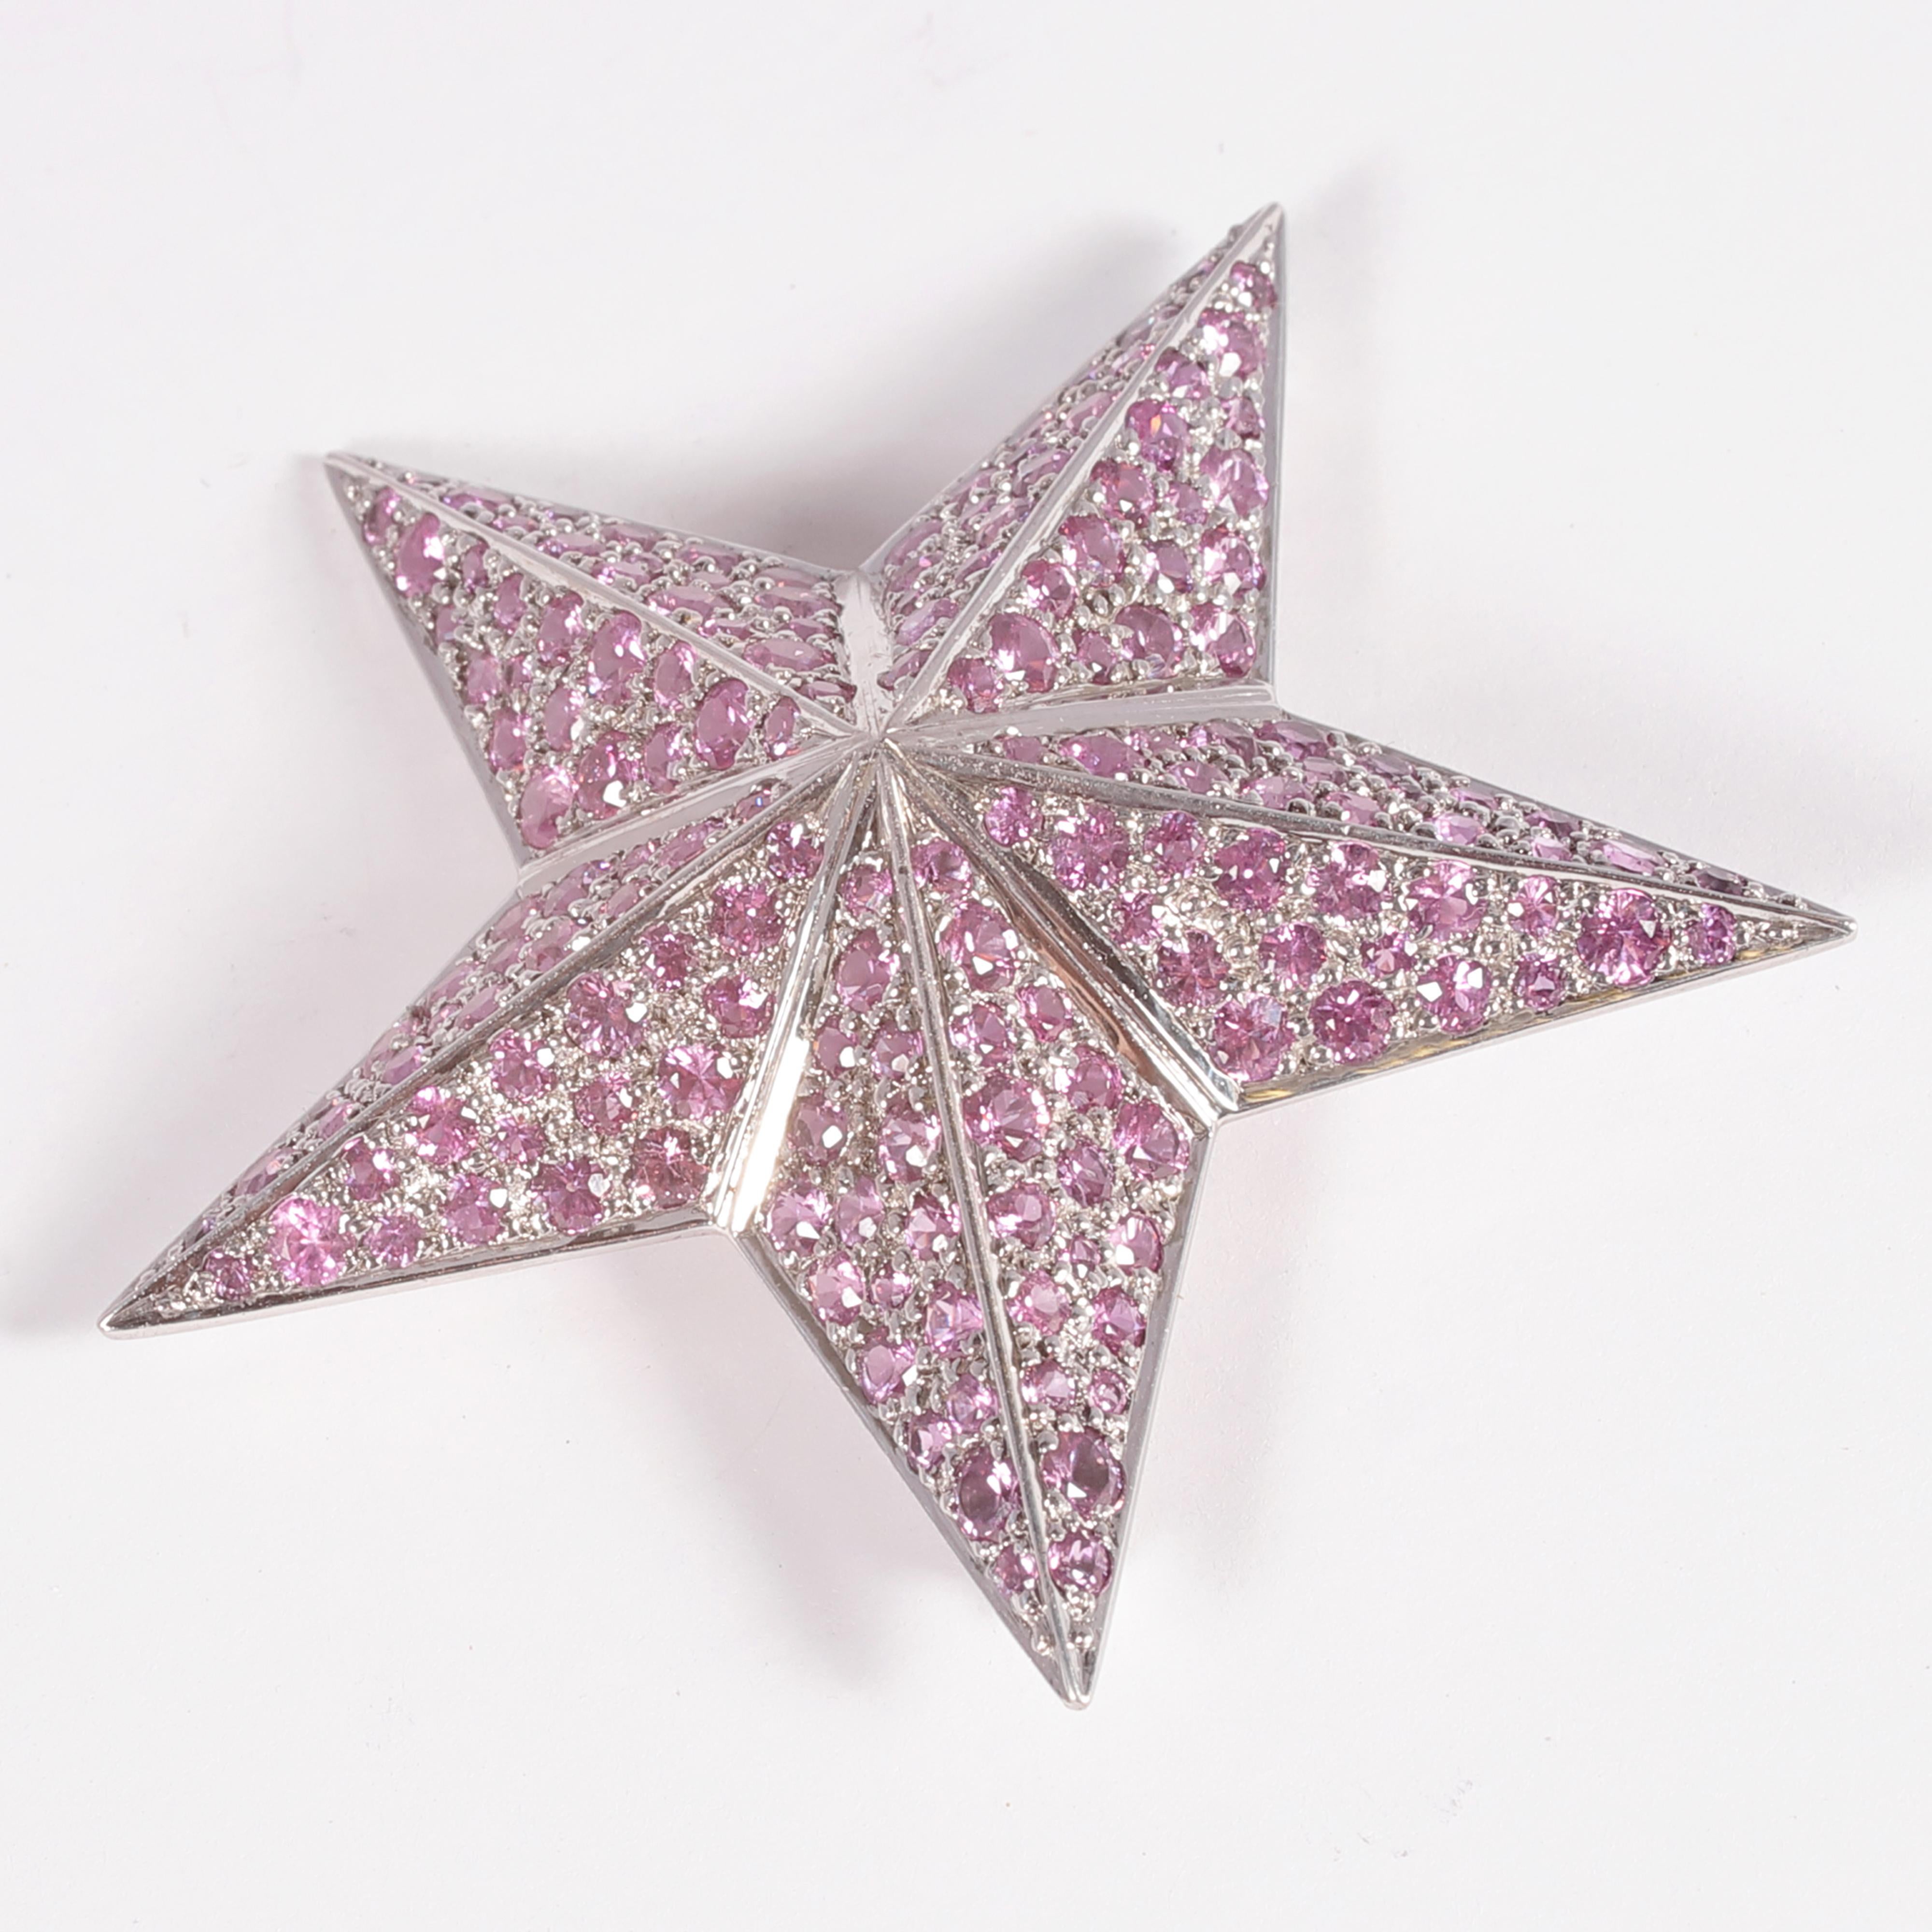 Fun statement piece!  This star brooch is in 18 karat white gold and features 8.10 carats of bright pink sapphires. 
Light weight and so pretty!